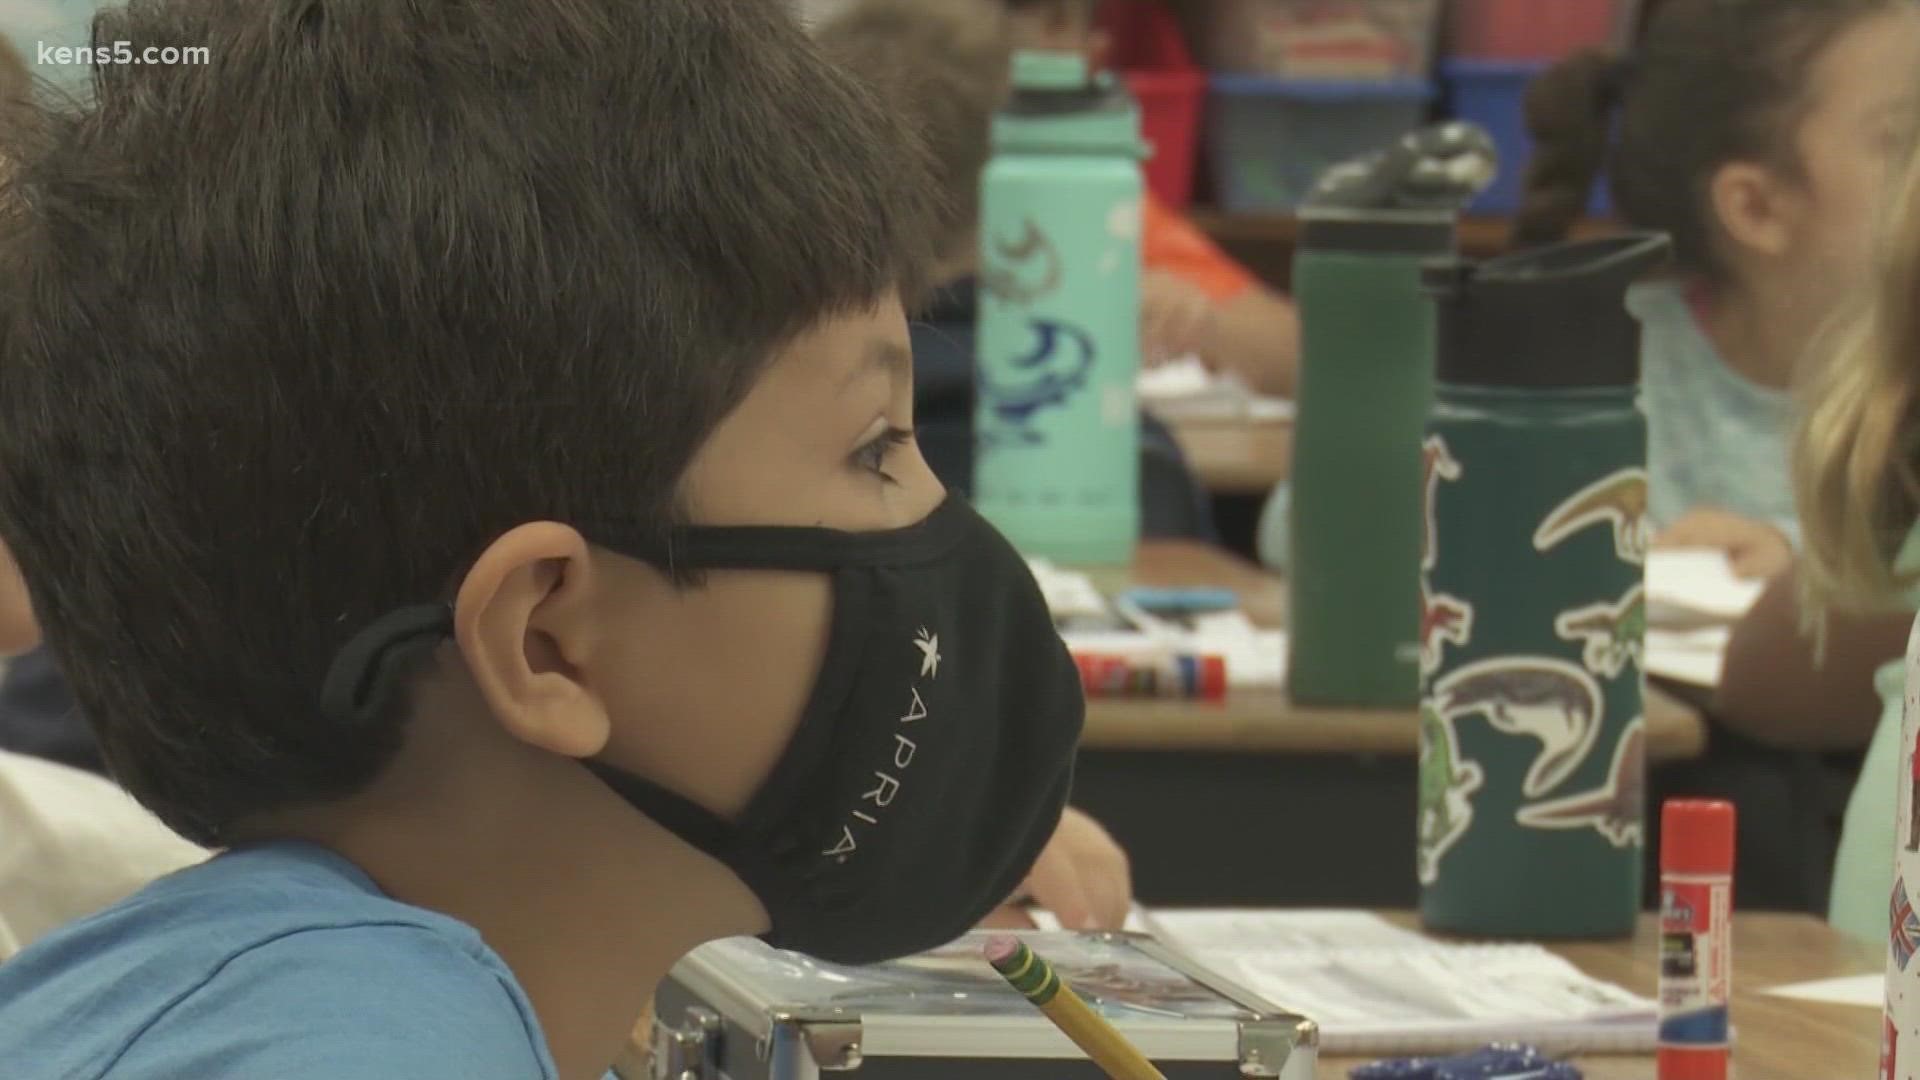 The Governor's order means public schools cannot mandate masks, and the decision is up to parents. We visited one school already in session to see how it's working.